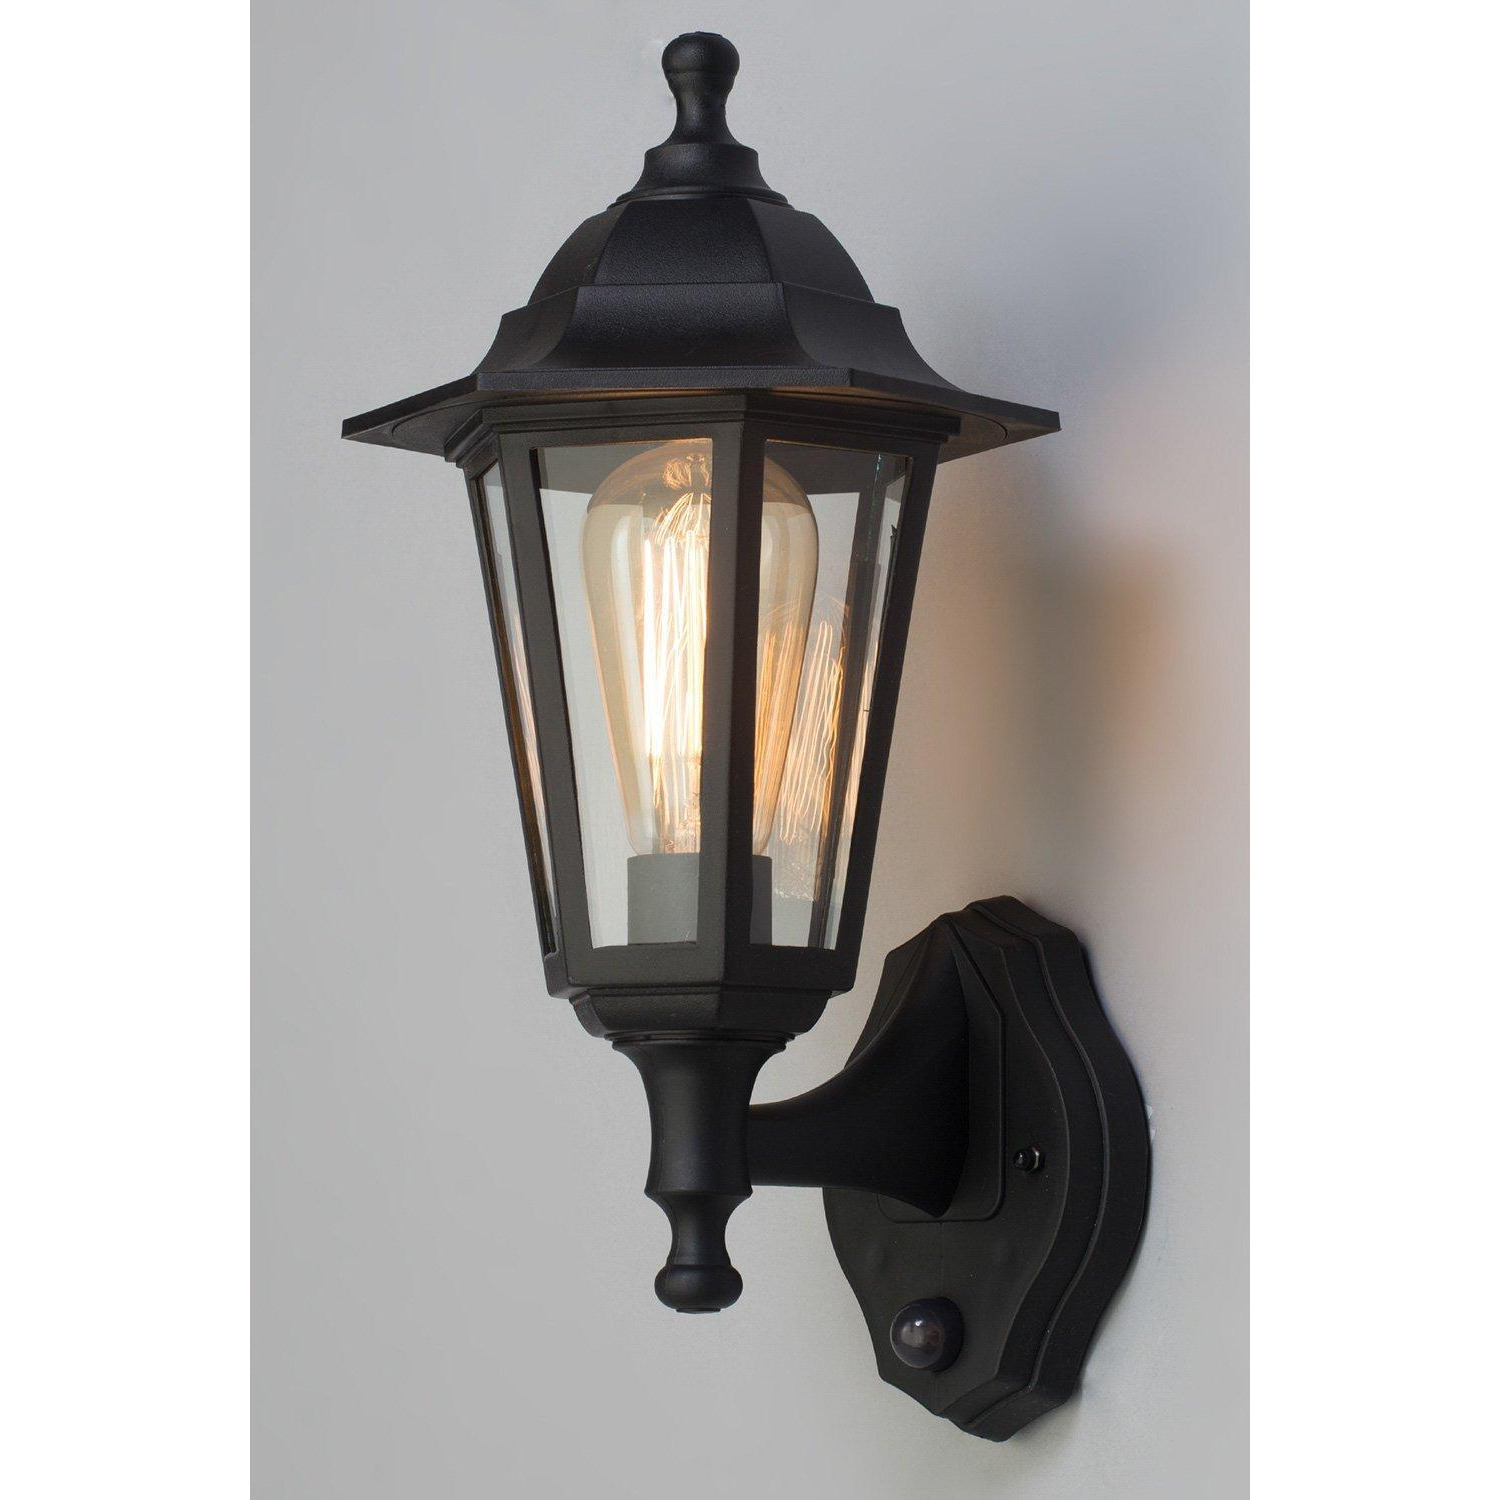 Ferris Outdoor Wall Light with Sensor - image 1